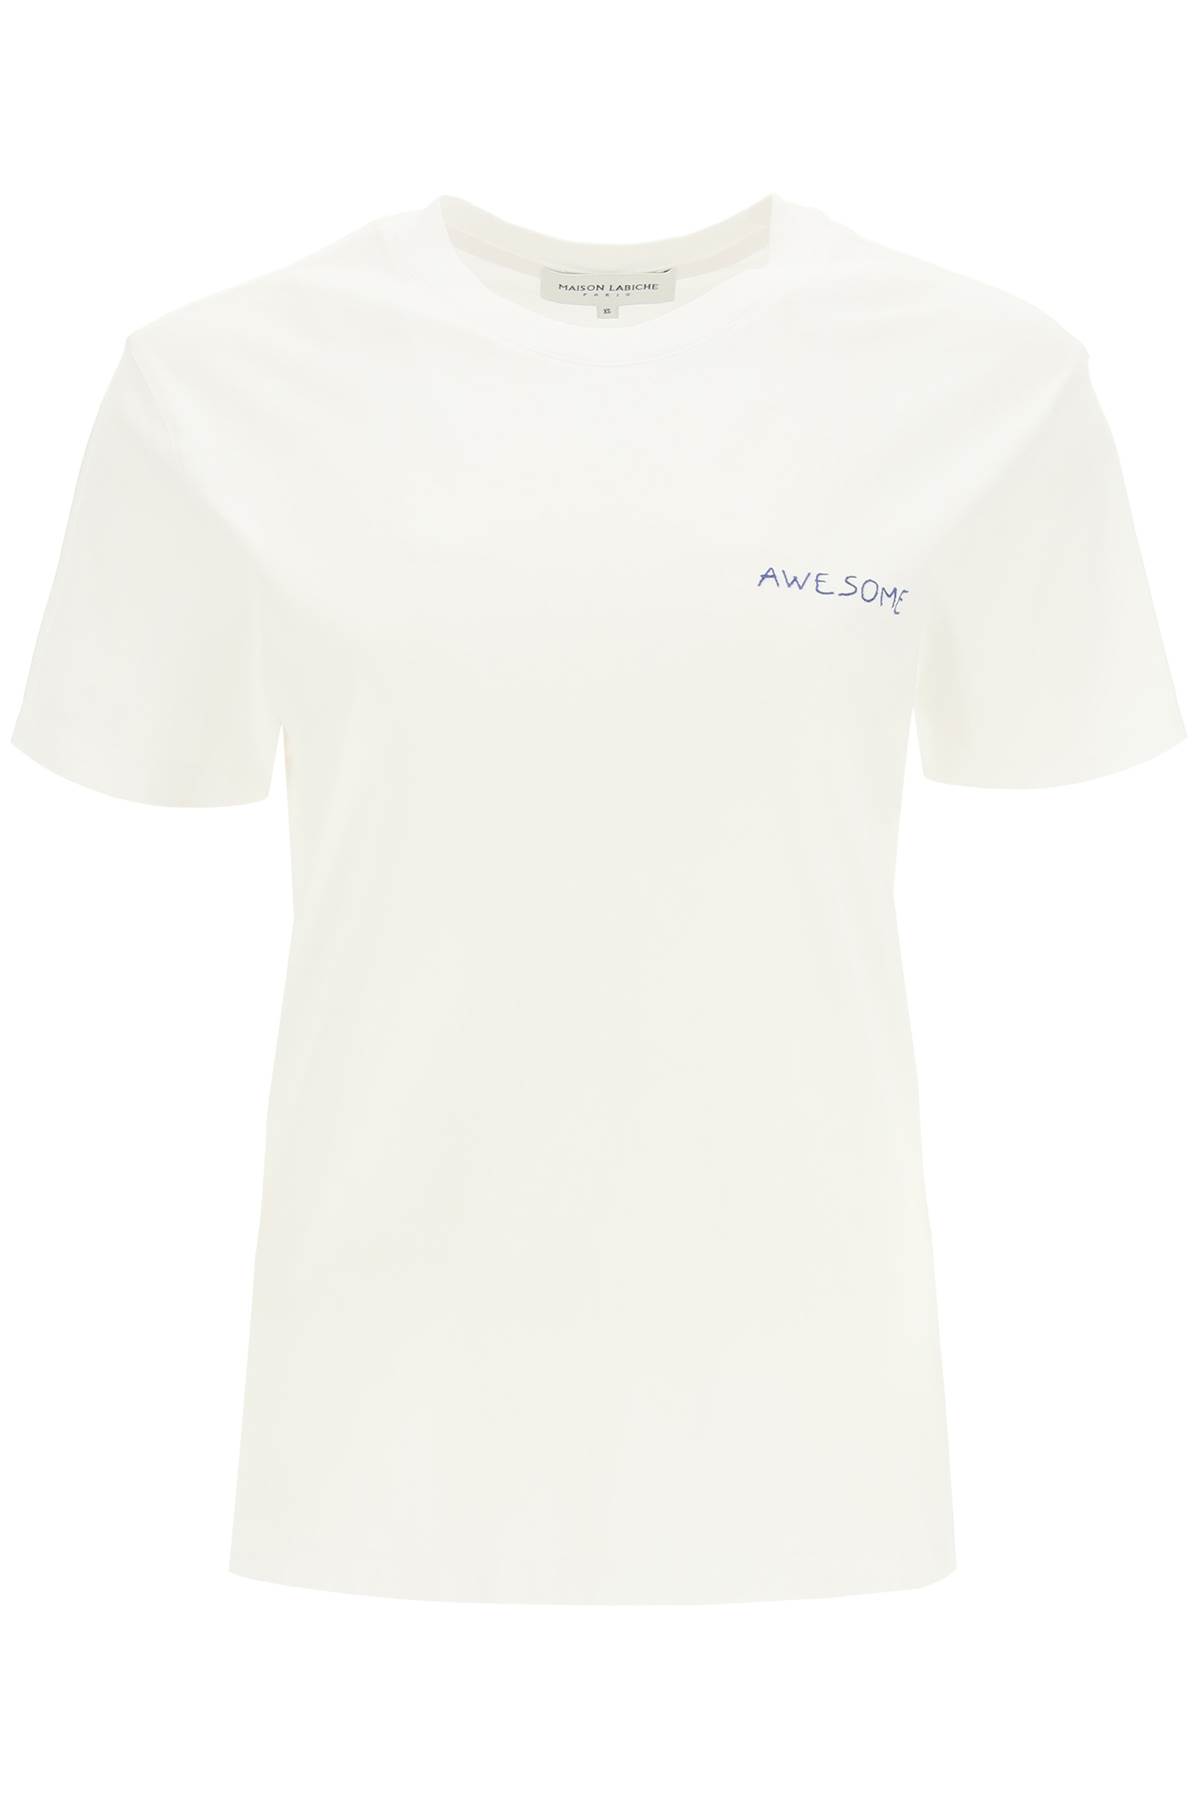 Maison Labiche Popincourt T-shirt With Awesome Embroidery